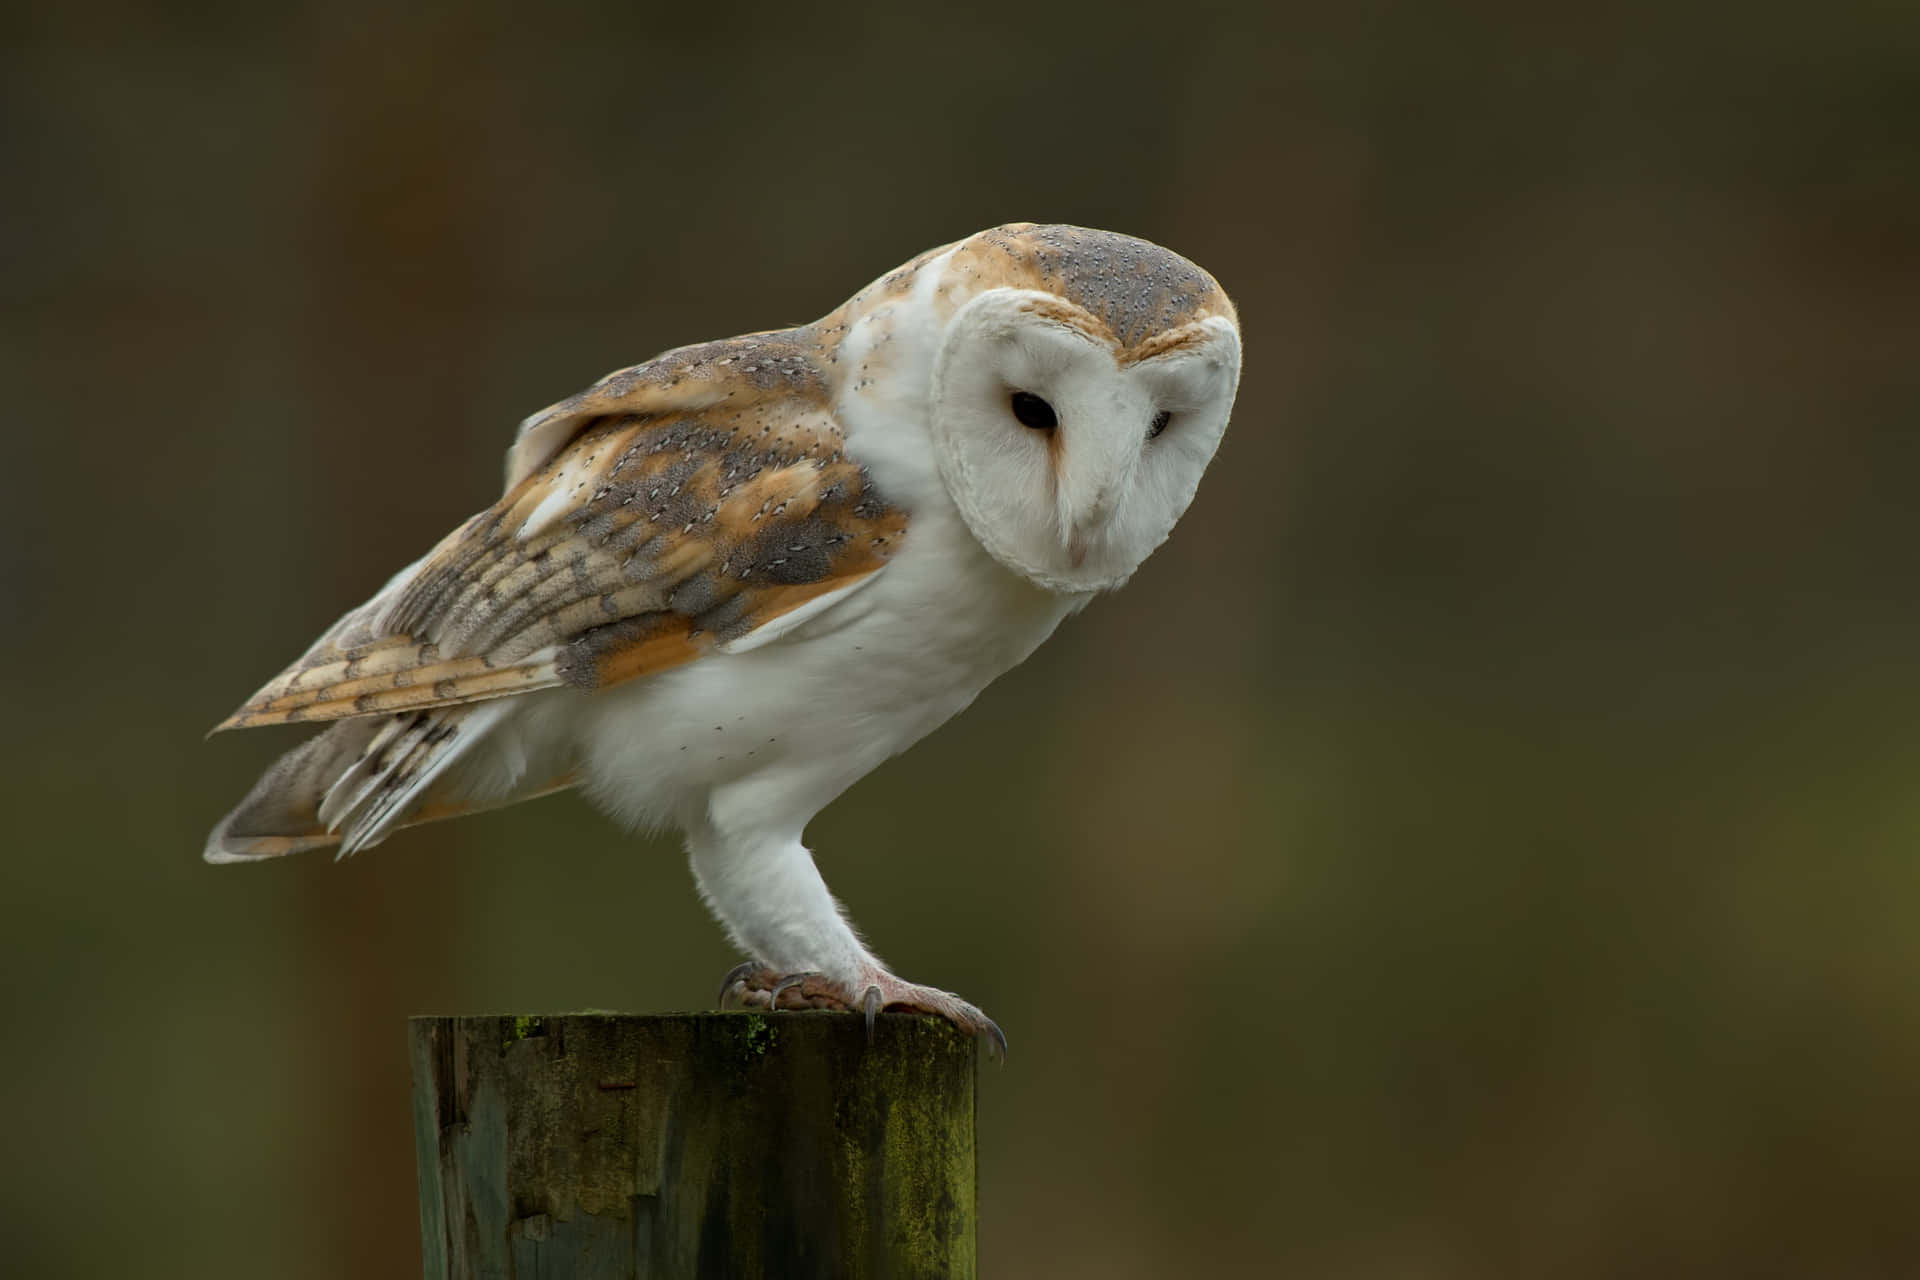 A Barn Owl perched on a tree branch